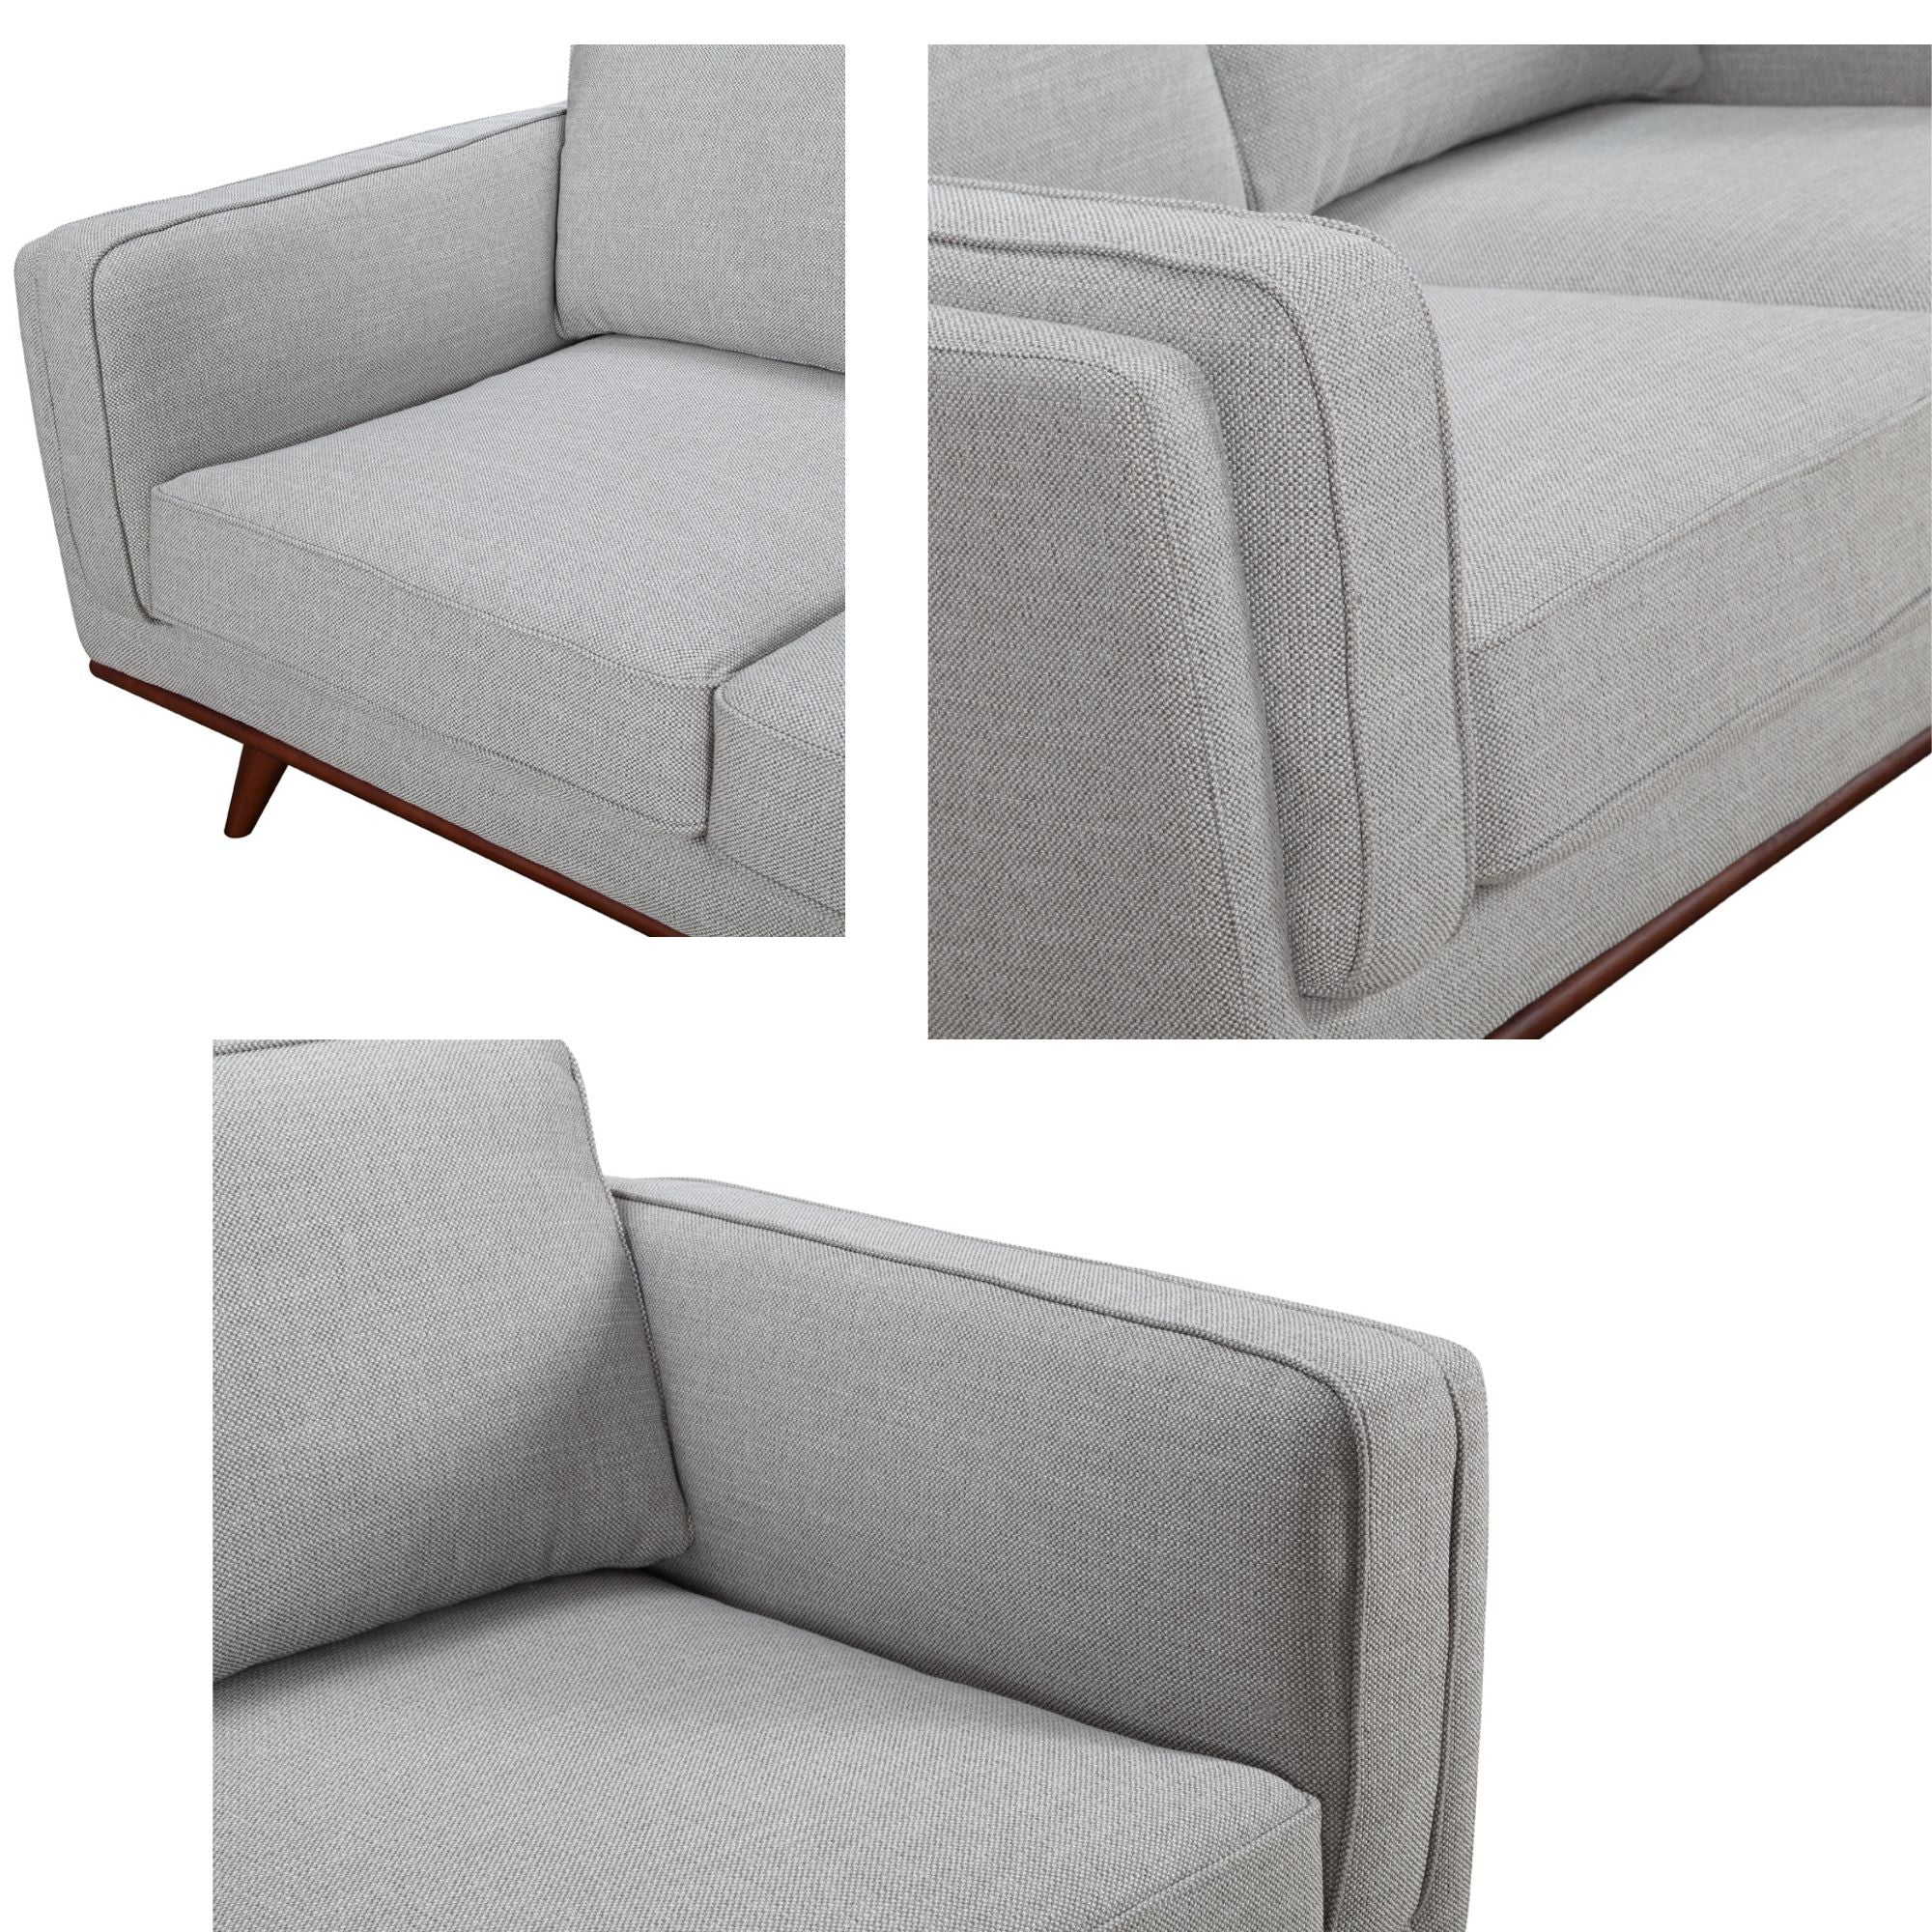 Petalsoft 3 Seater Sofa Fabric Uplholstered Lounge Couch - Grey